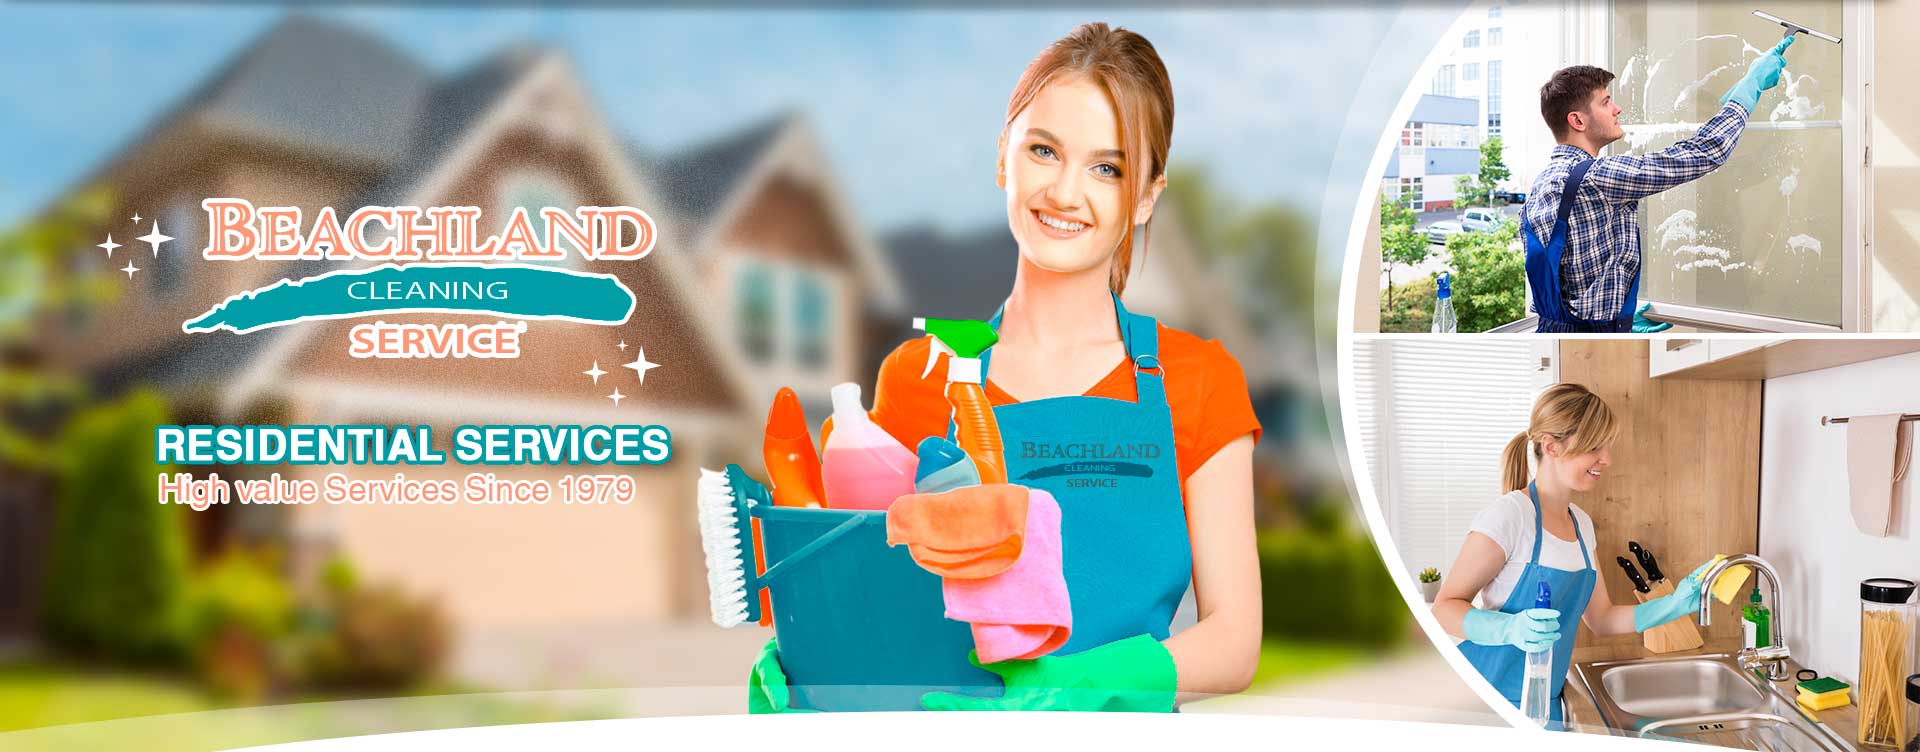 House Cleaning Service in Palm Beach County